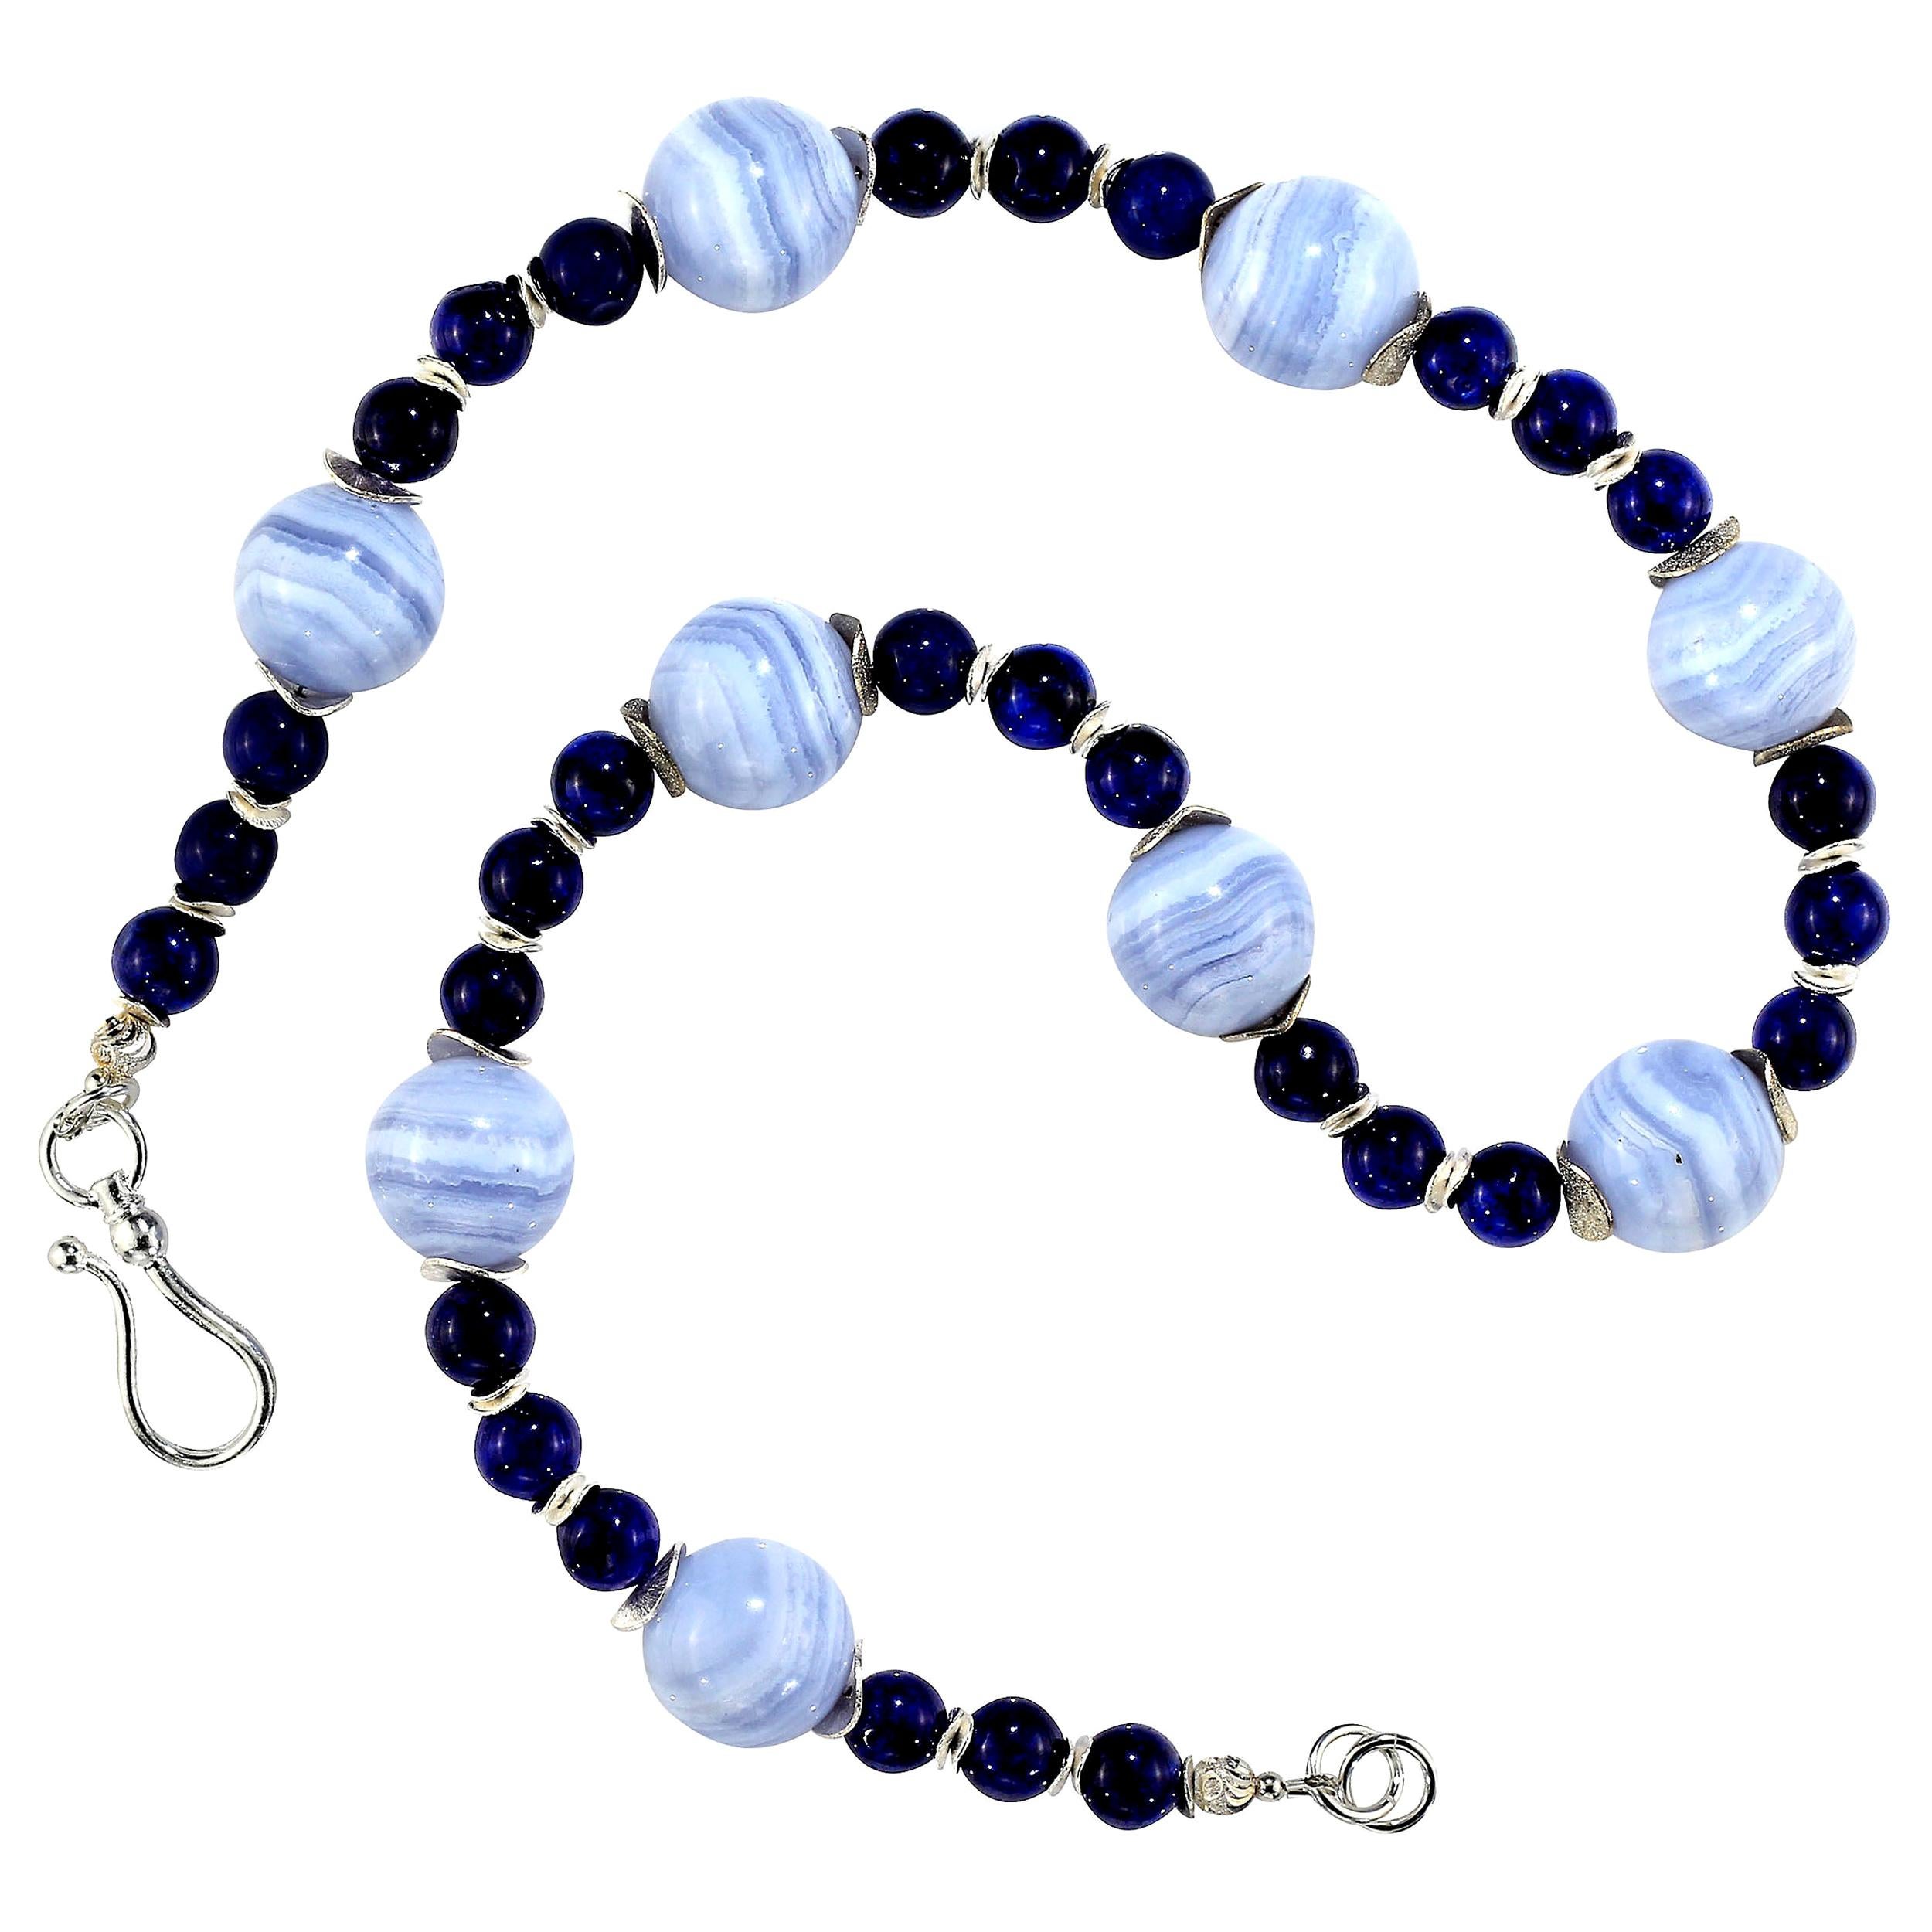 Gemjunky Hot Topic Necklace of Blue Lace Agate and Blue Agate